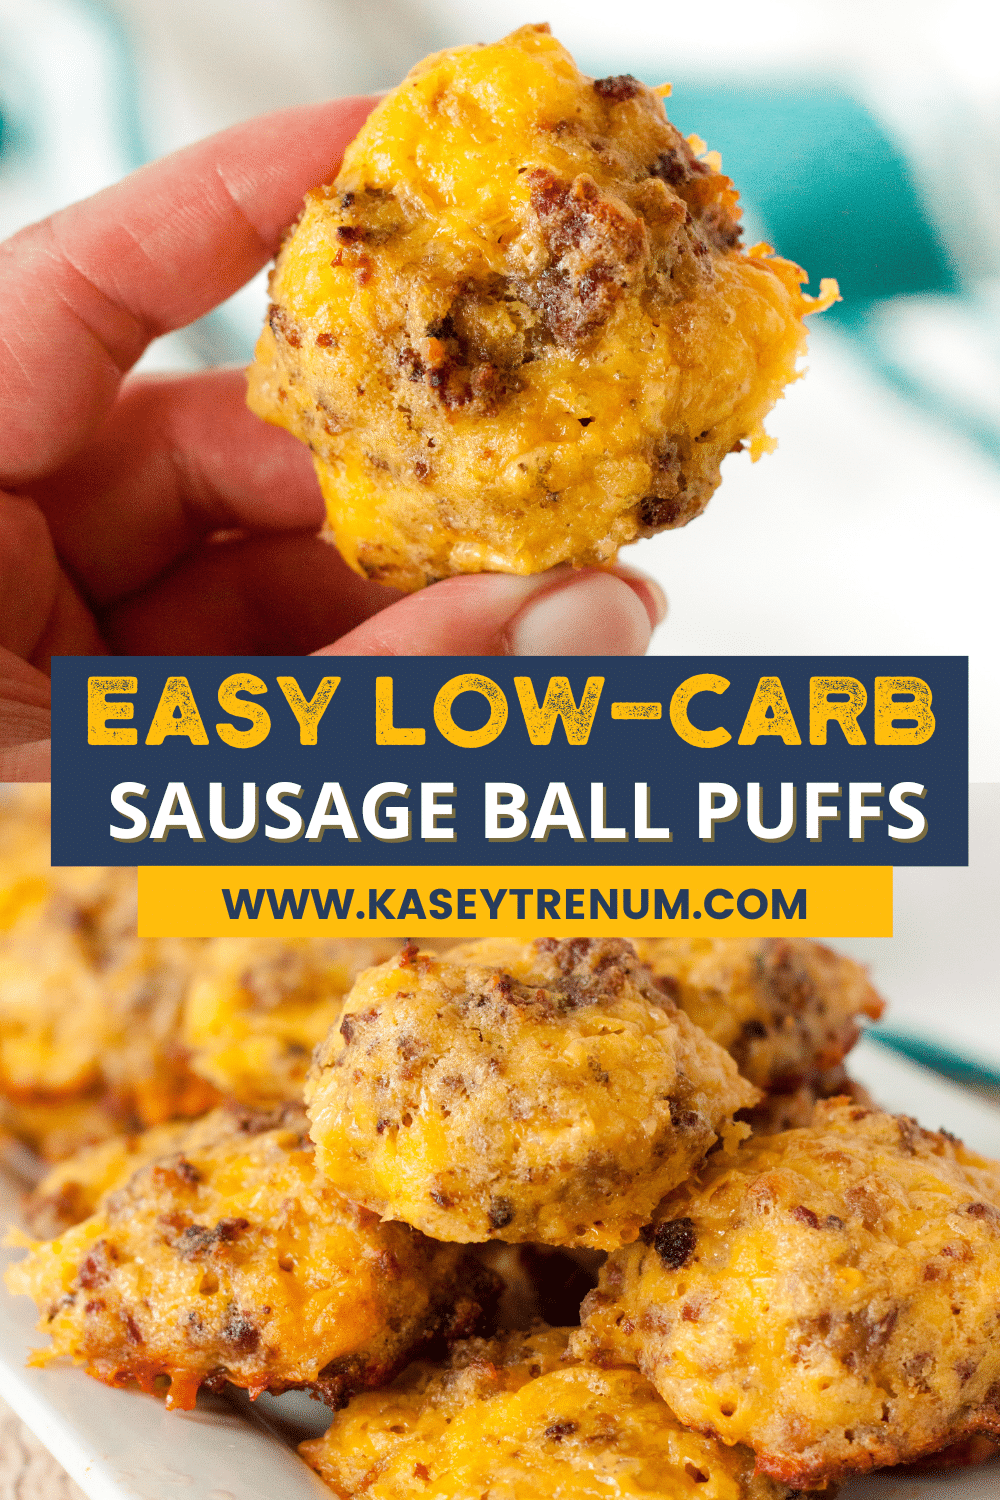 collaage image of a sausage ball puff being held between two fingers on top and plated sausage balls on the bottom.